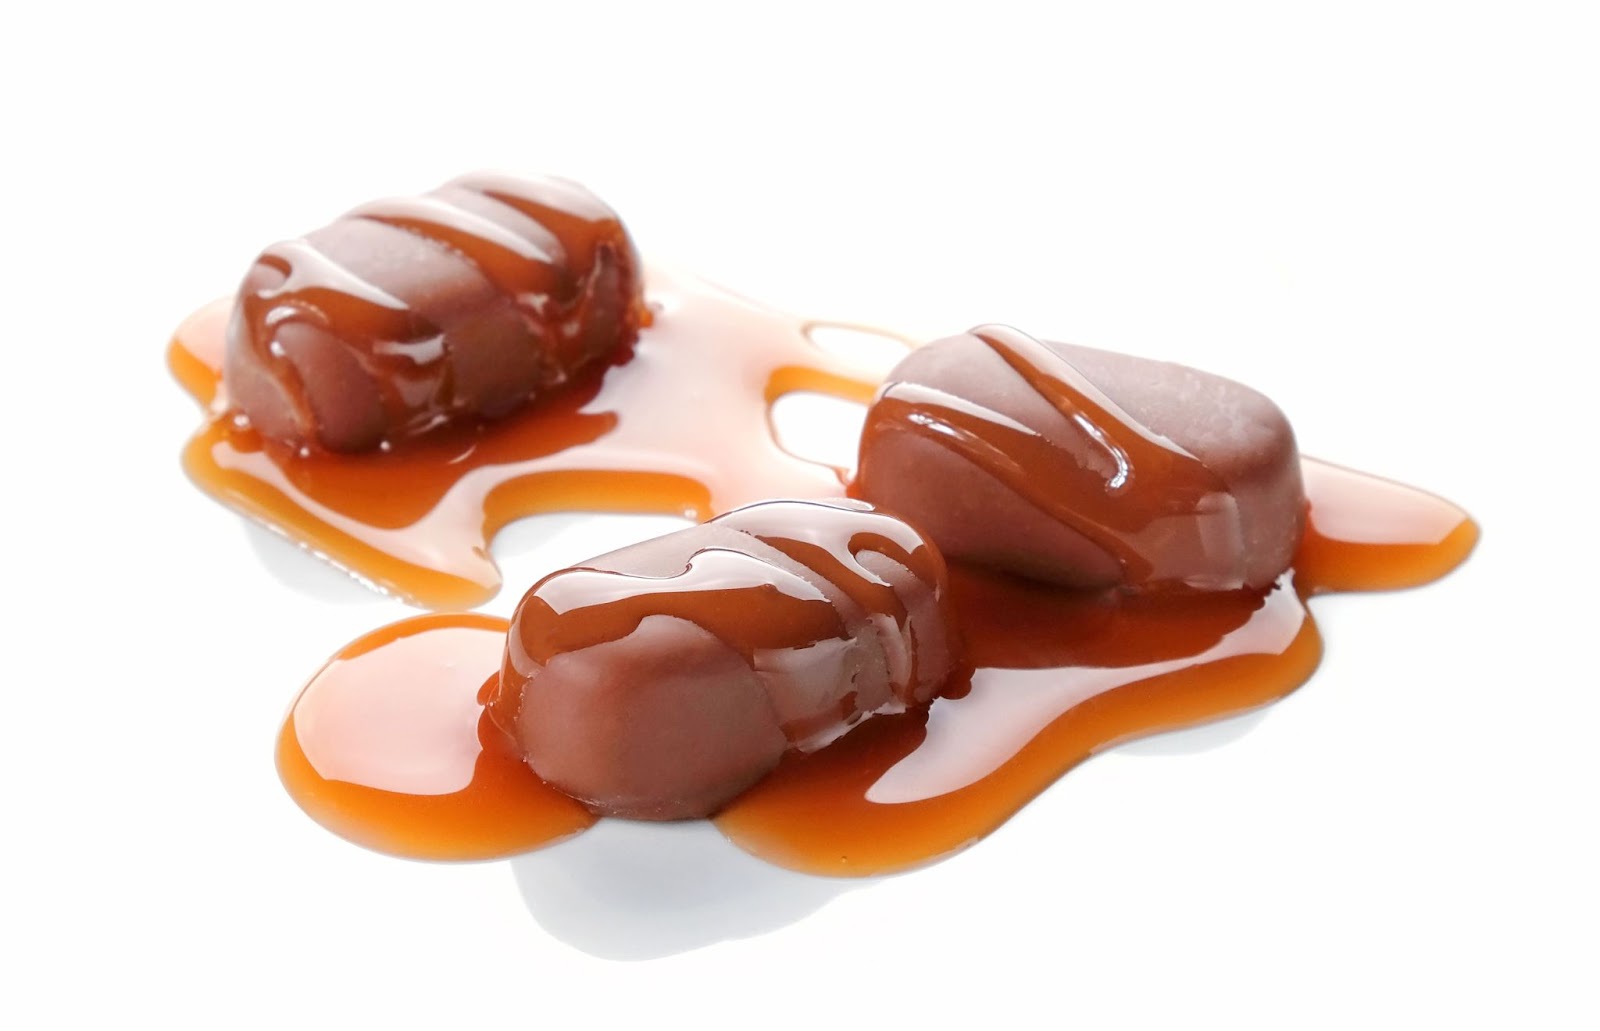 Three chocolate-covered caramel candies drizzled with rich caramel sauce, arranged appealingly on a simple background.